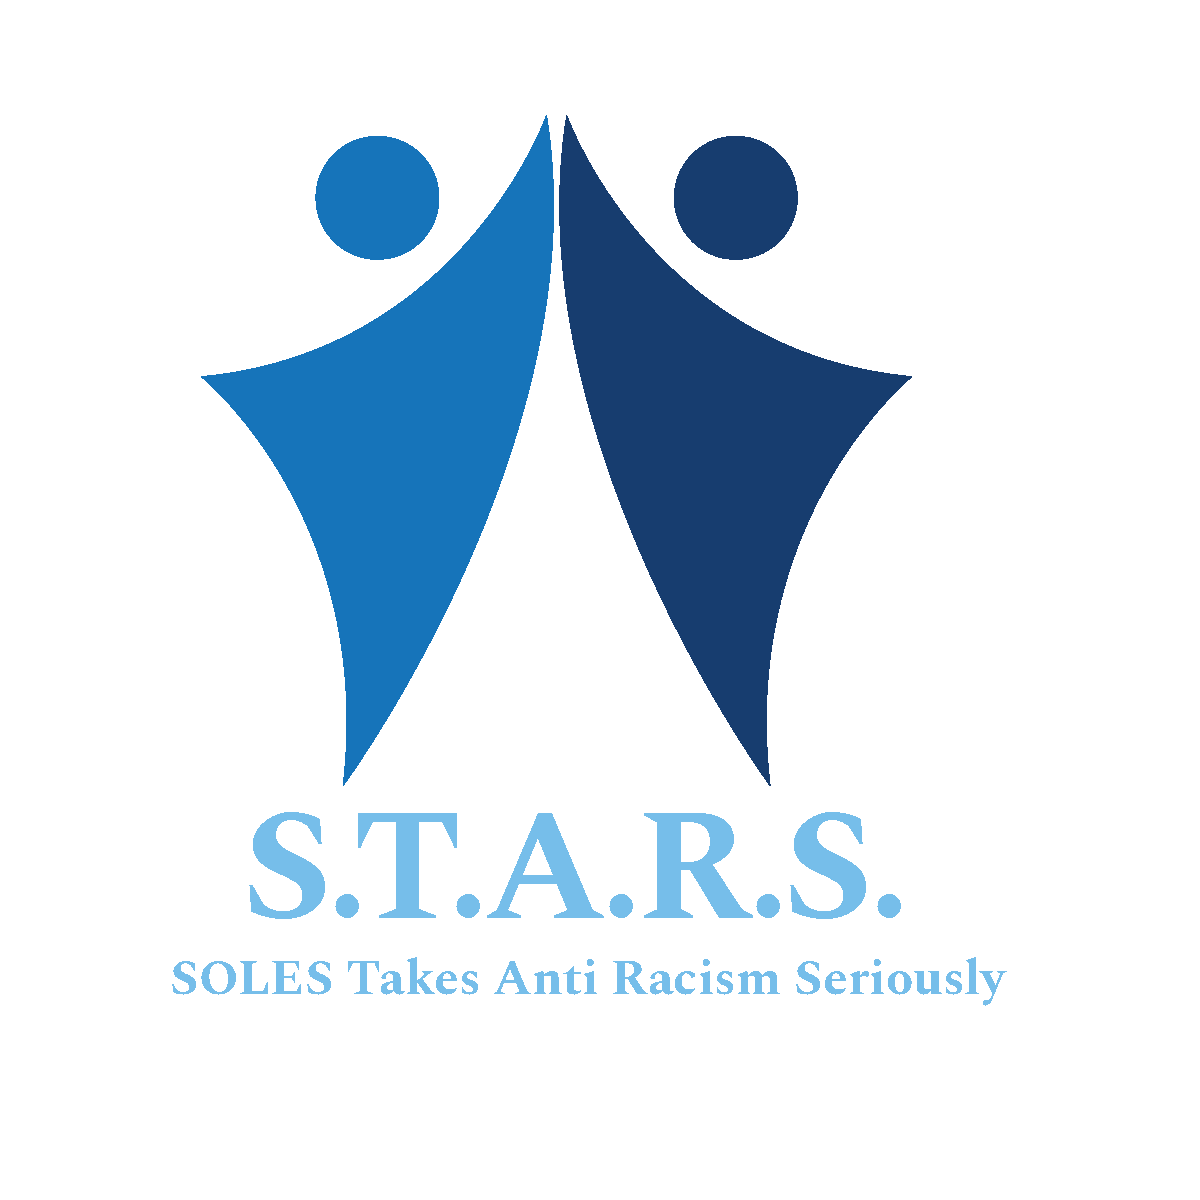 SOLES Takes Anti Racism Seriously (S.T.A.R.S) Advocate Program and Training